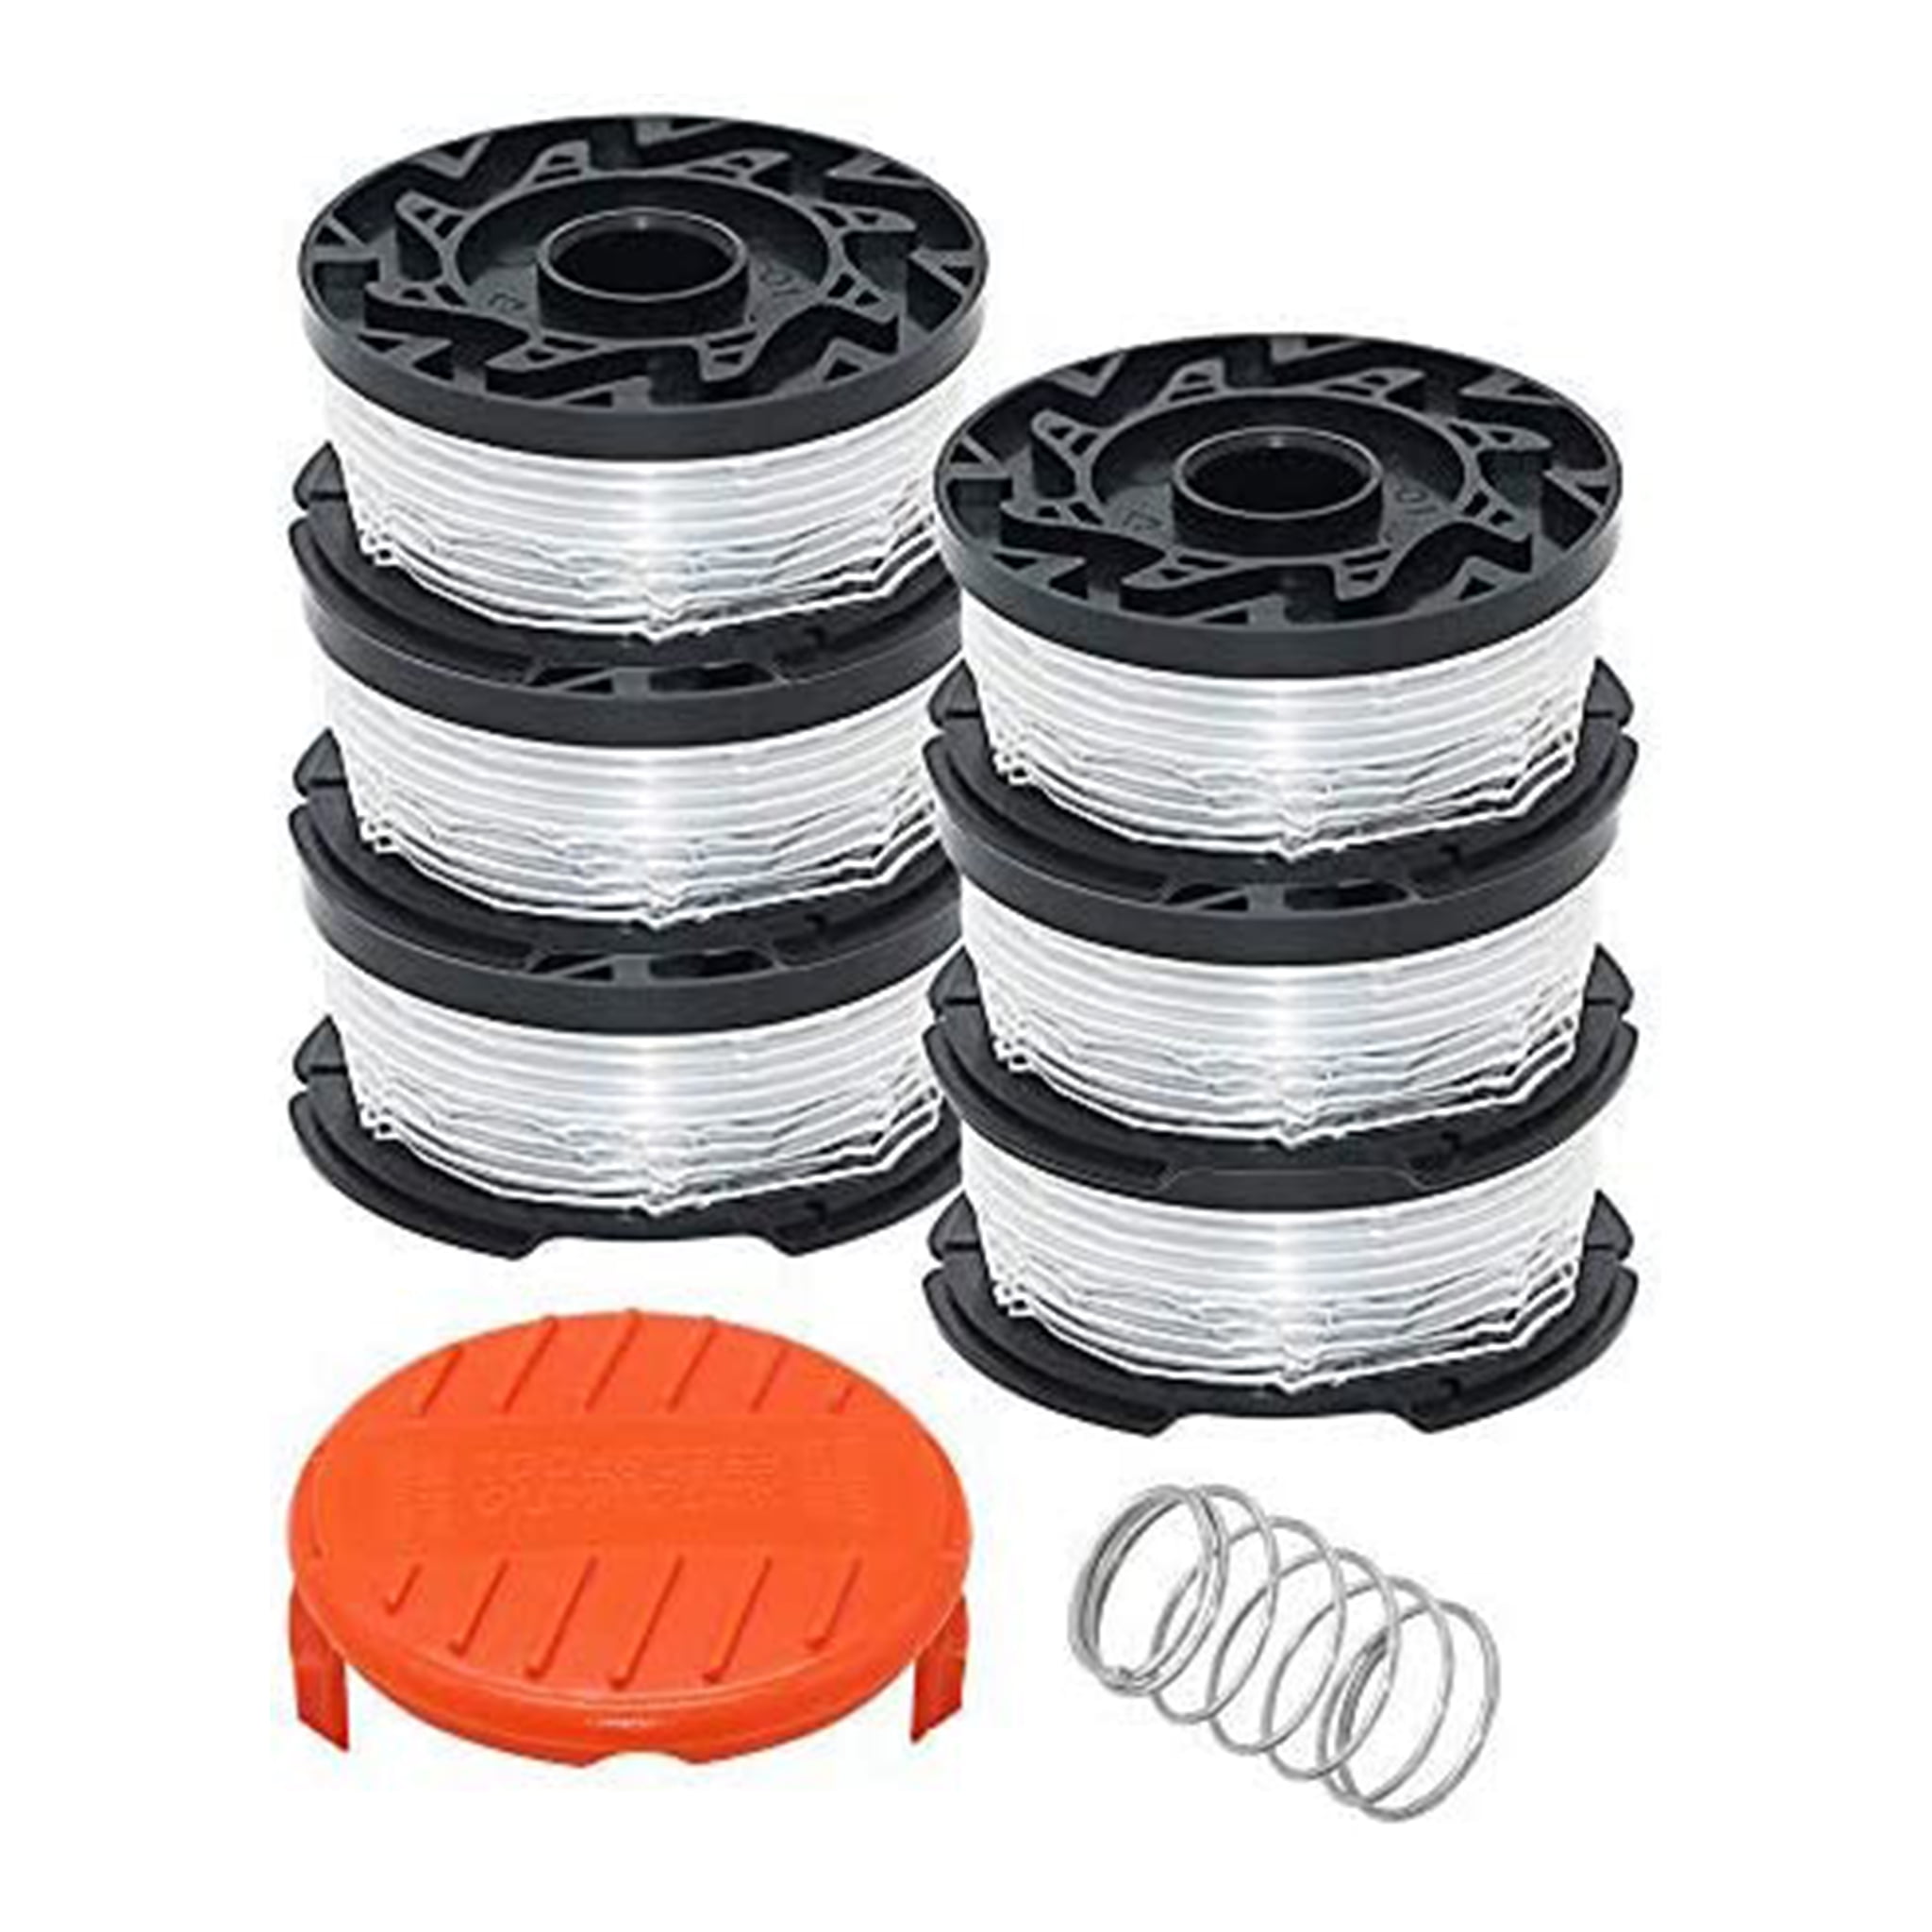 PACK OF 3 / Black & Decker GH3000 Trimmer Cap Replacement Spool COVER  90583594N $18.95 - PicClick